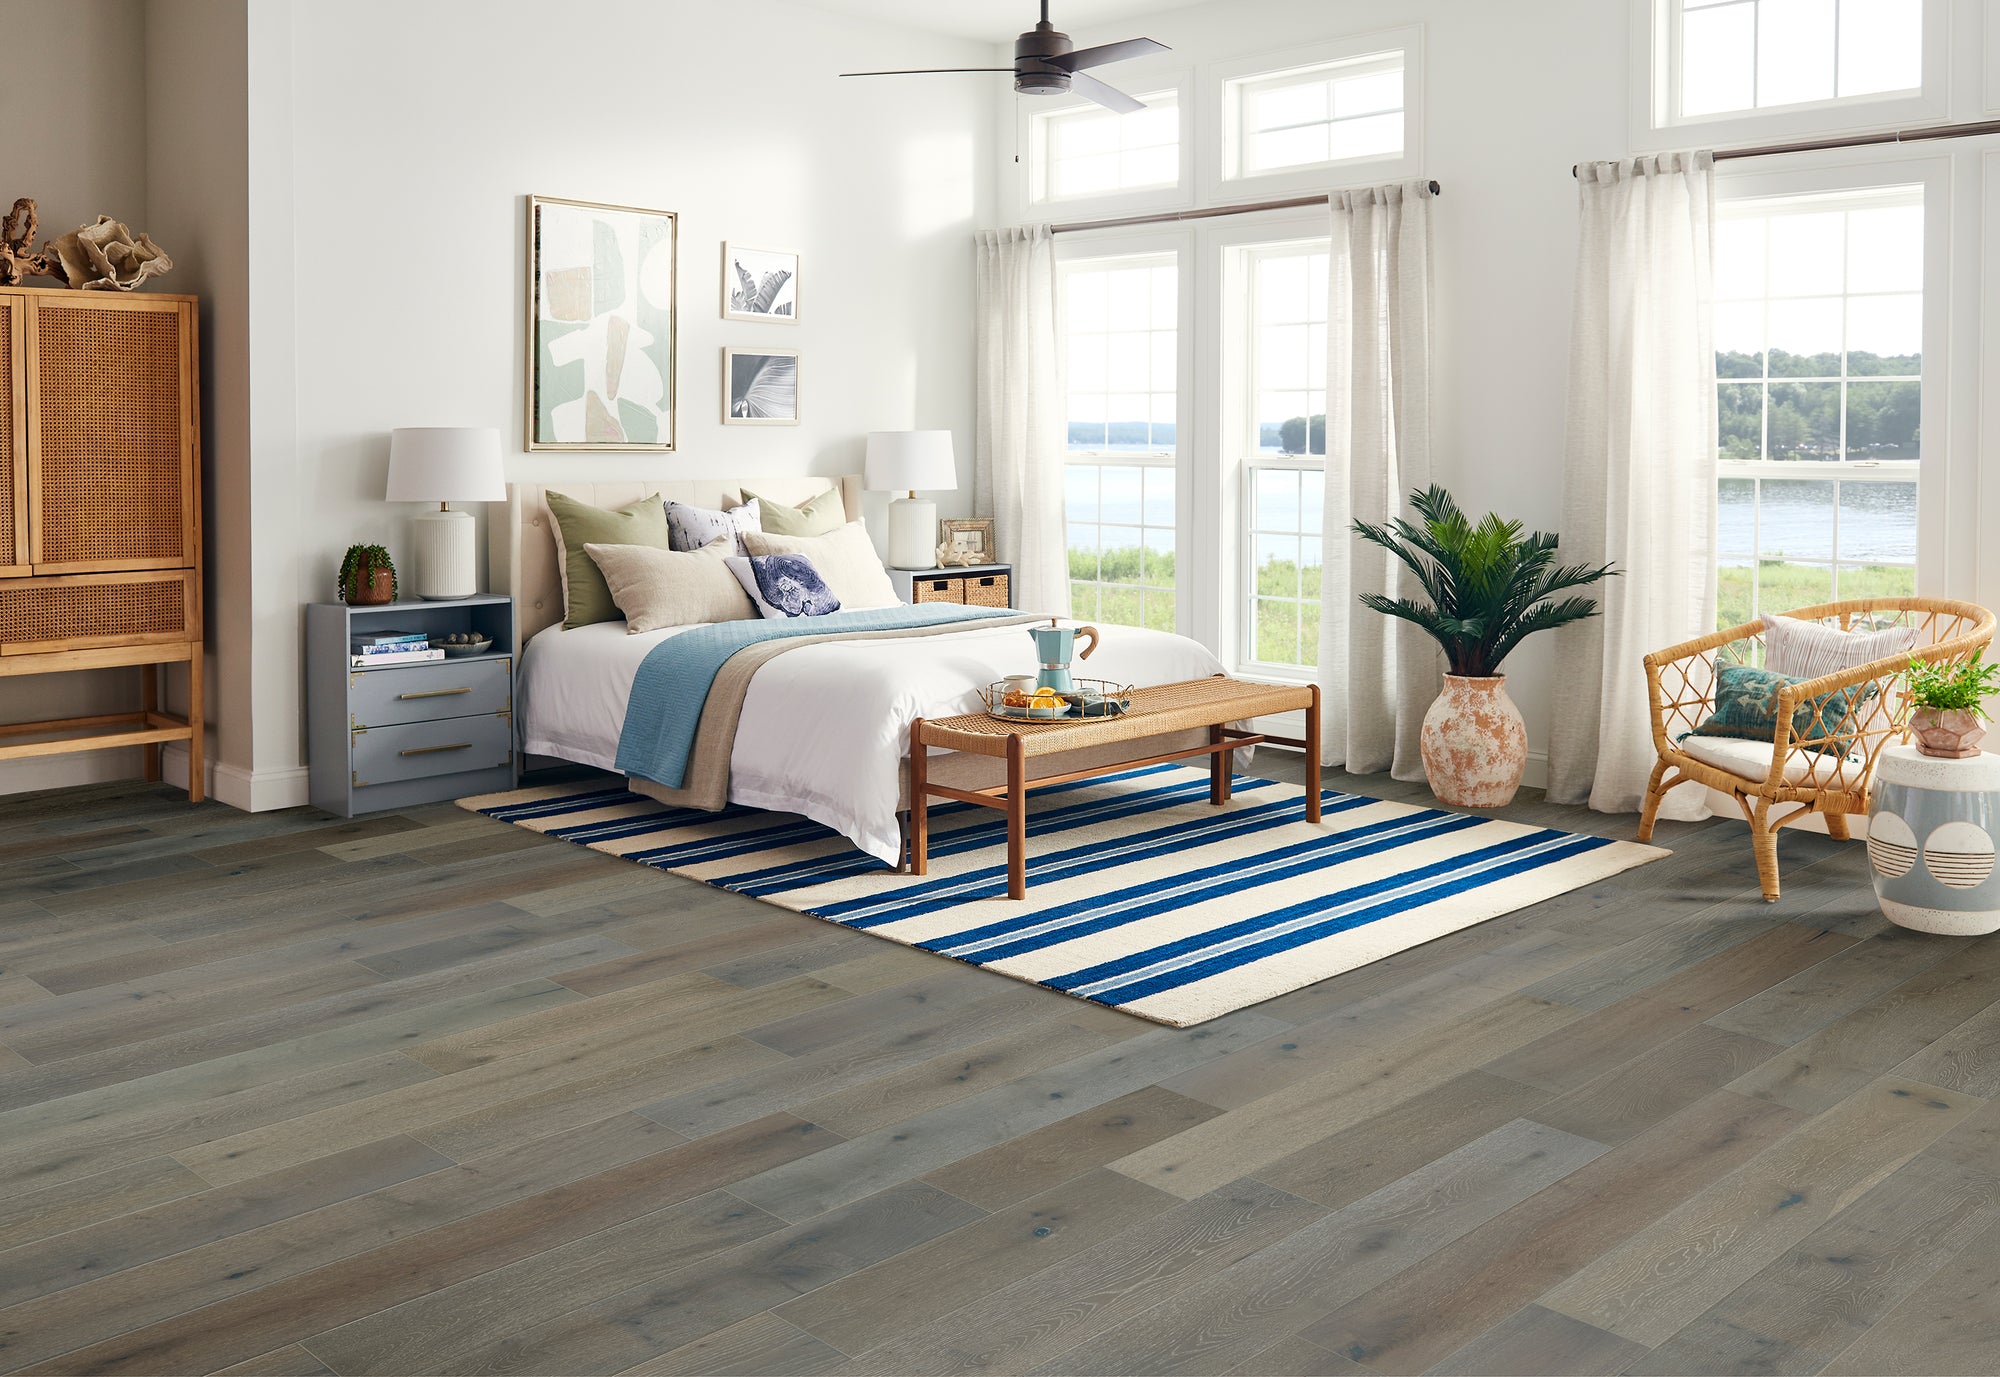 Bruce - Brushed Impressions Gold Collection - 7.5 in. White Oak Hardwood - Dream State